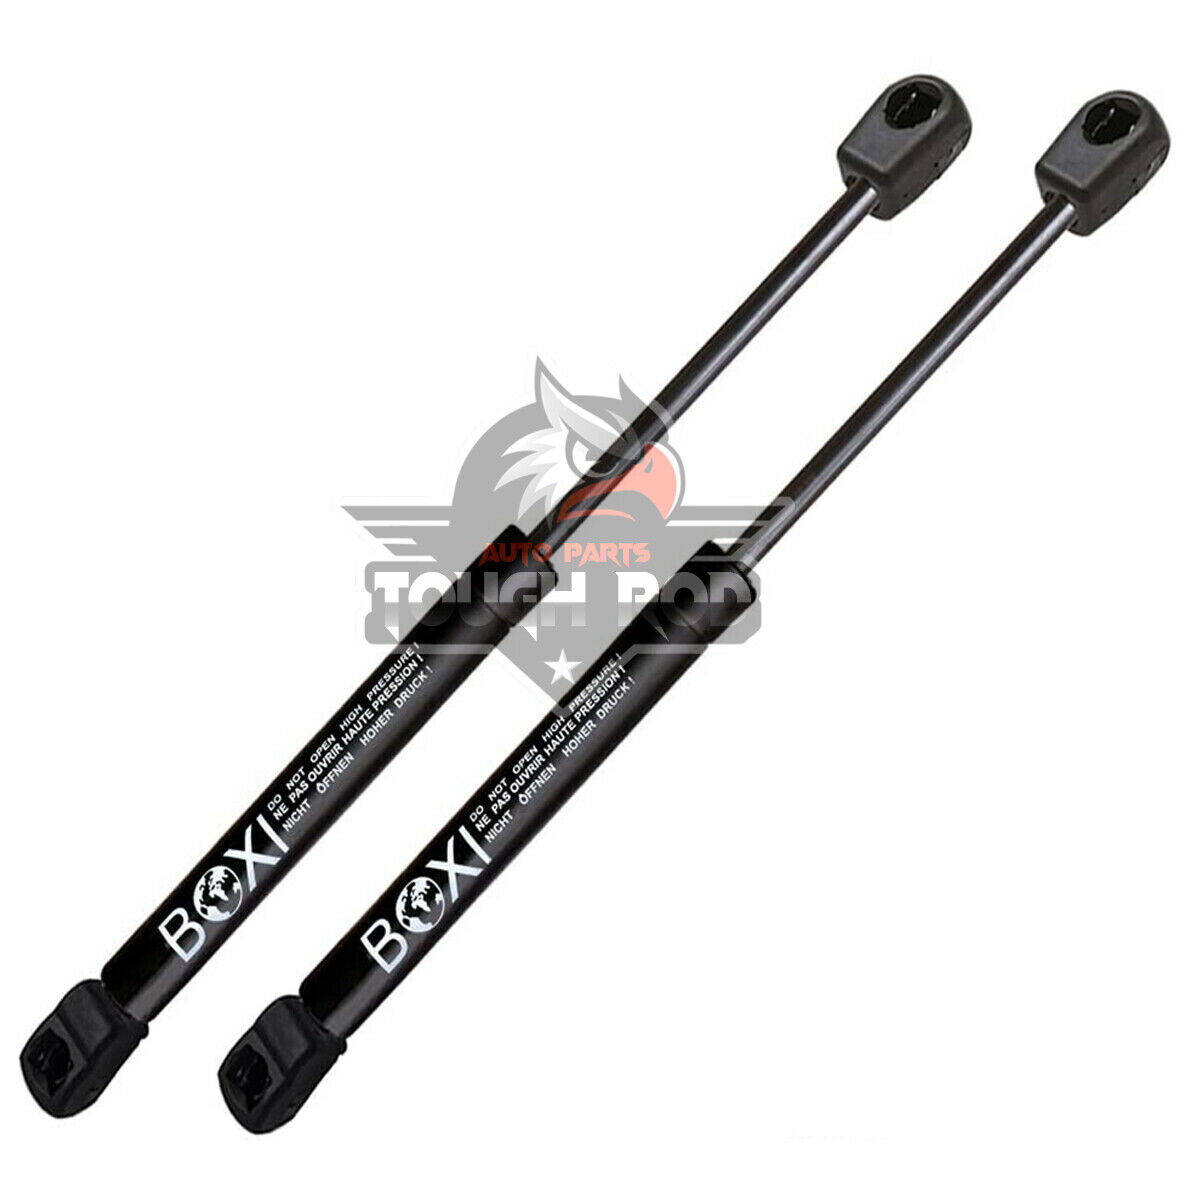 2x For Nissan Murano 2009-14 Front Hood Lift Support Struts Shocks Gas Springs